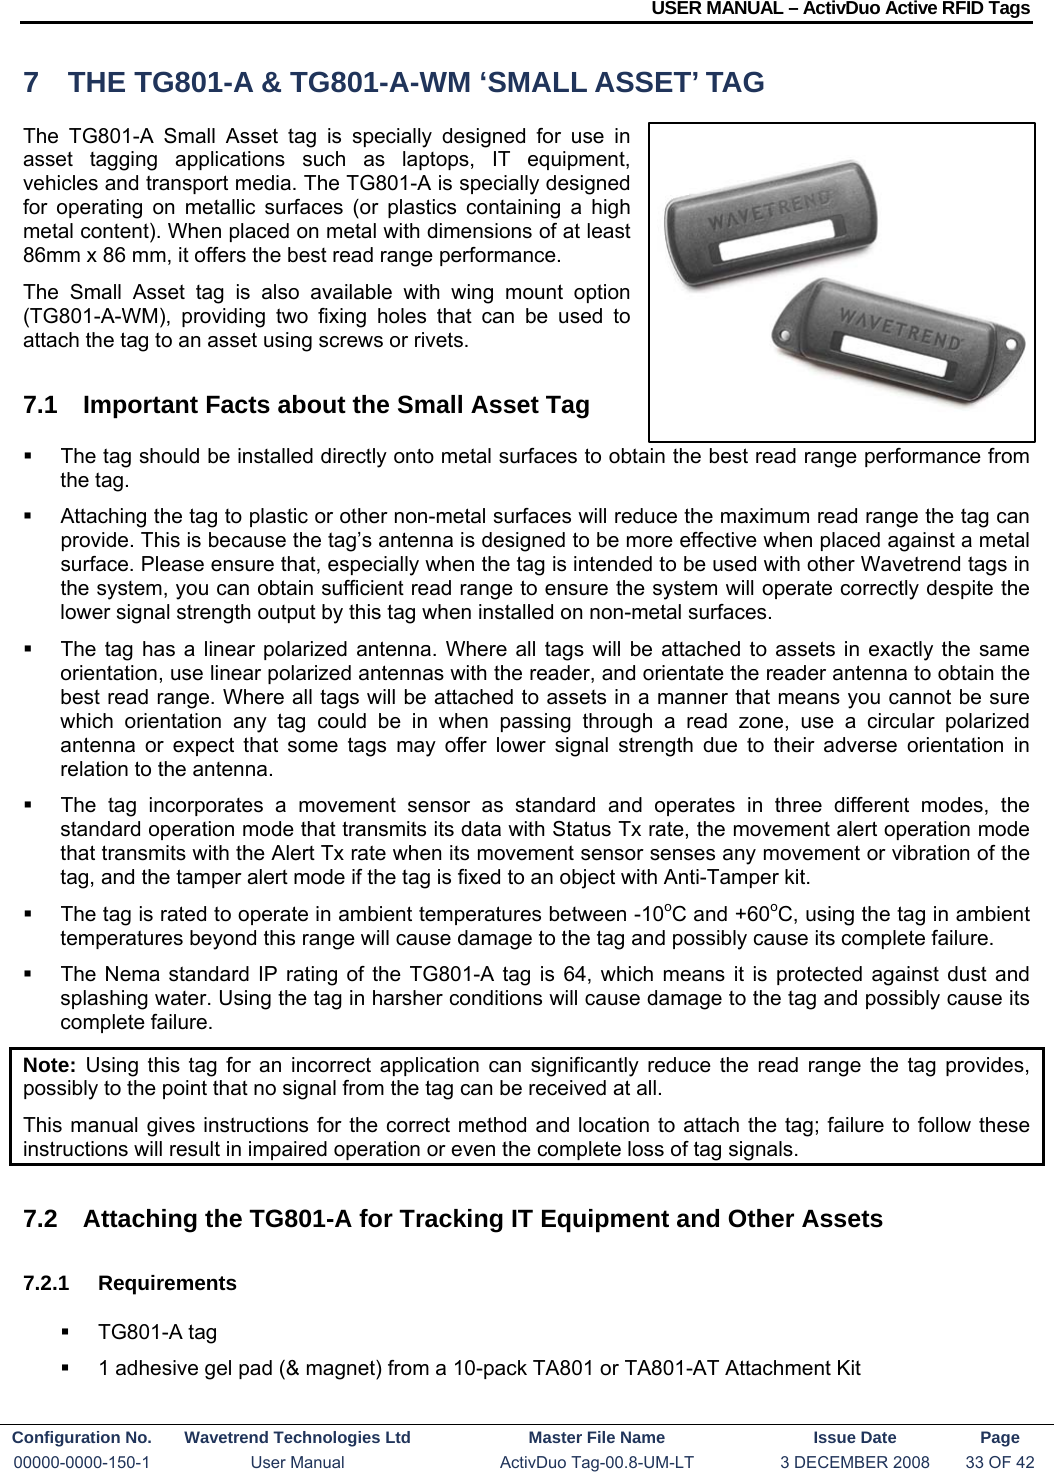 USER MANUAL – ActivDuo Active RFID Tags Configuration No.  Wavetrend Technologies Ltd  Master File Name   Issue Date  Page 00000-0000-150-1  User Manual  ActivDuo Tag-00.8-UM-LT  3 DECEMBER 2008  33 OF 42  7  THE TG801-A &amp; TG801-A-WM ‘SMALL ASSET’ TAG The TG801-A Small Asset tag is specially designed for use in asset tagging applications such as laptops, IT equipment, vehicles and transport media. The TG801-A is specially designed for operating on metallic surfaces (or plastics containing a high metal content). When placed on metal with dimensions of at least 86mm x 86 mm, it offers the best read range performance. The Small Asset tag is also available with wing mount option (TG801-A-WM), providing two fixing holes that can be used to attach the tag to an asset using screws or rivets. 7.1  Important Facts about the Small Asset Tag   The tag should be installed directly onto metal surfaces to obtain the best read range performance from the tag.    Attaching the tag to plastic or other non-metal surfaces will reduce the maximum read range the tag can provide. This is because the tag’s antenna is designed to be more effective when placed against a metal surface. Please ensure that, especially when the tag is intended to be used with other Wavetrend tags in the system, you can obtain sufficient read range to ensure the system will operate correctly despite the lower signal strength output by this tag when installed on non-metal surfaces.   The tag has a linear polarized antenna. Where all tags will be attached to assets in exactly the same orientation, use linear polarized antennas with the reader, and orientate the reader antenna to obtain the best read range. Where all tags will be attached to assets in a manner that means you cannot be sure which orientation any tag could be in when passing through a read zone, use a circular polarized antenna or expect that some tags may offer lower signal strength due to their adverse orientation in relation to the antenna.   The tag incorporates a movement sensor as standard and operates in three different modes, the standard operation mode that transmits its data with Status Tx rate, the movement alert operation mode that transmits with the Alert Tx rate when its movement sensor senses any movement or vibration of the tag, and the tamper alert mode if the tag is fixed to an object with Anti-Tamper kit.   The tag is rated to operate in ambient temperatures between -10oC and +60oC, using the tag in ambient temperatures beyond this range will cause damage to the tag and possibly cause its complete failure.   The Nema standard IP rating of the TG801-A tag is 64, which means it is protected against dust and splashing water. Using the tag in harsher conditions will cause damage to the tag and possibly cause its complete failure. Note:  Using this tag for an incorrect application can significantly reduce the read range the tag provides, possibly to the point that no signal from the tag can be received at all. This manual gives instructions for the correct method and location to attach the tag; failure to follow these instructions will result in impaired operation or even the complete loss of tag signals.  7.2  Attaching the TG801-A for Tracking IT Equipment and Other Assets 7.2.1 Requirements  TG801-A tag   1 adhesive gel pad (&amp; magnet) from a 10-pack TA801 or TA801-AT Attachment Kit  